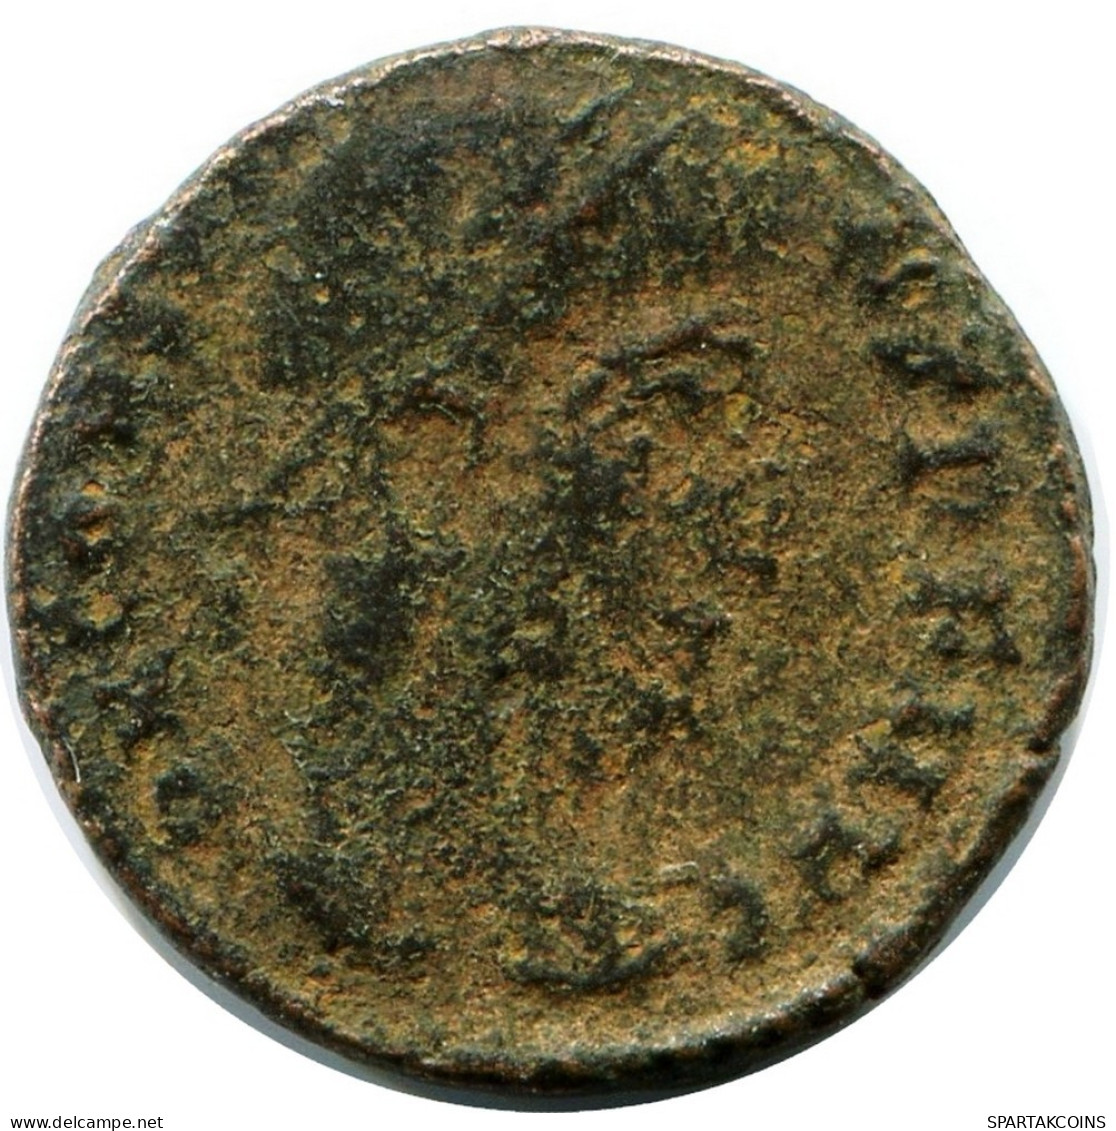 CONSTANS MINTED IN CYZICUS FROM THE ROYAL ONTARIO MUSEUM #ANC11684.14.E.A - El Impero Christiano (307 / 363)